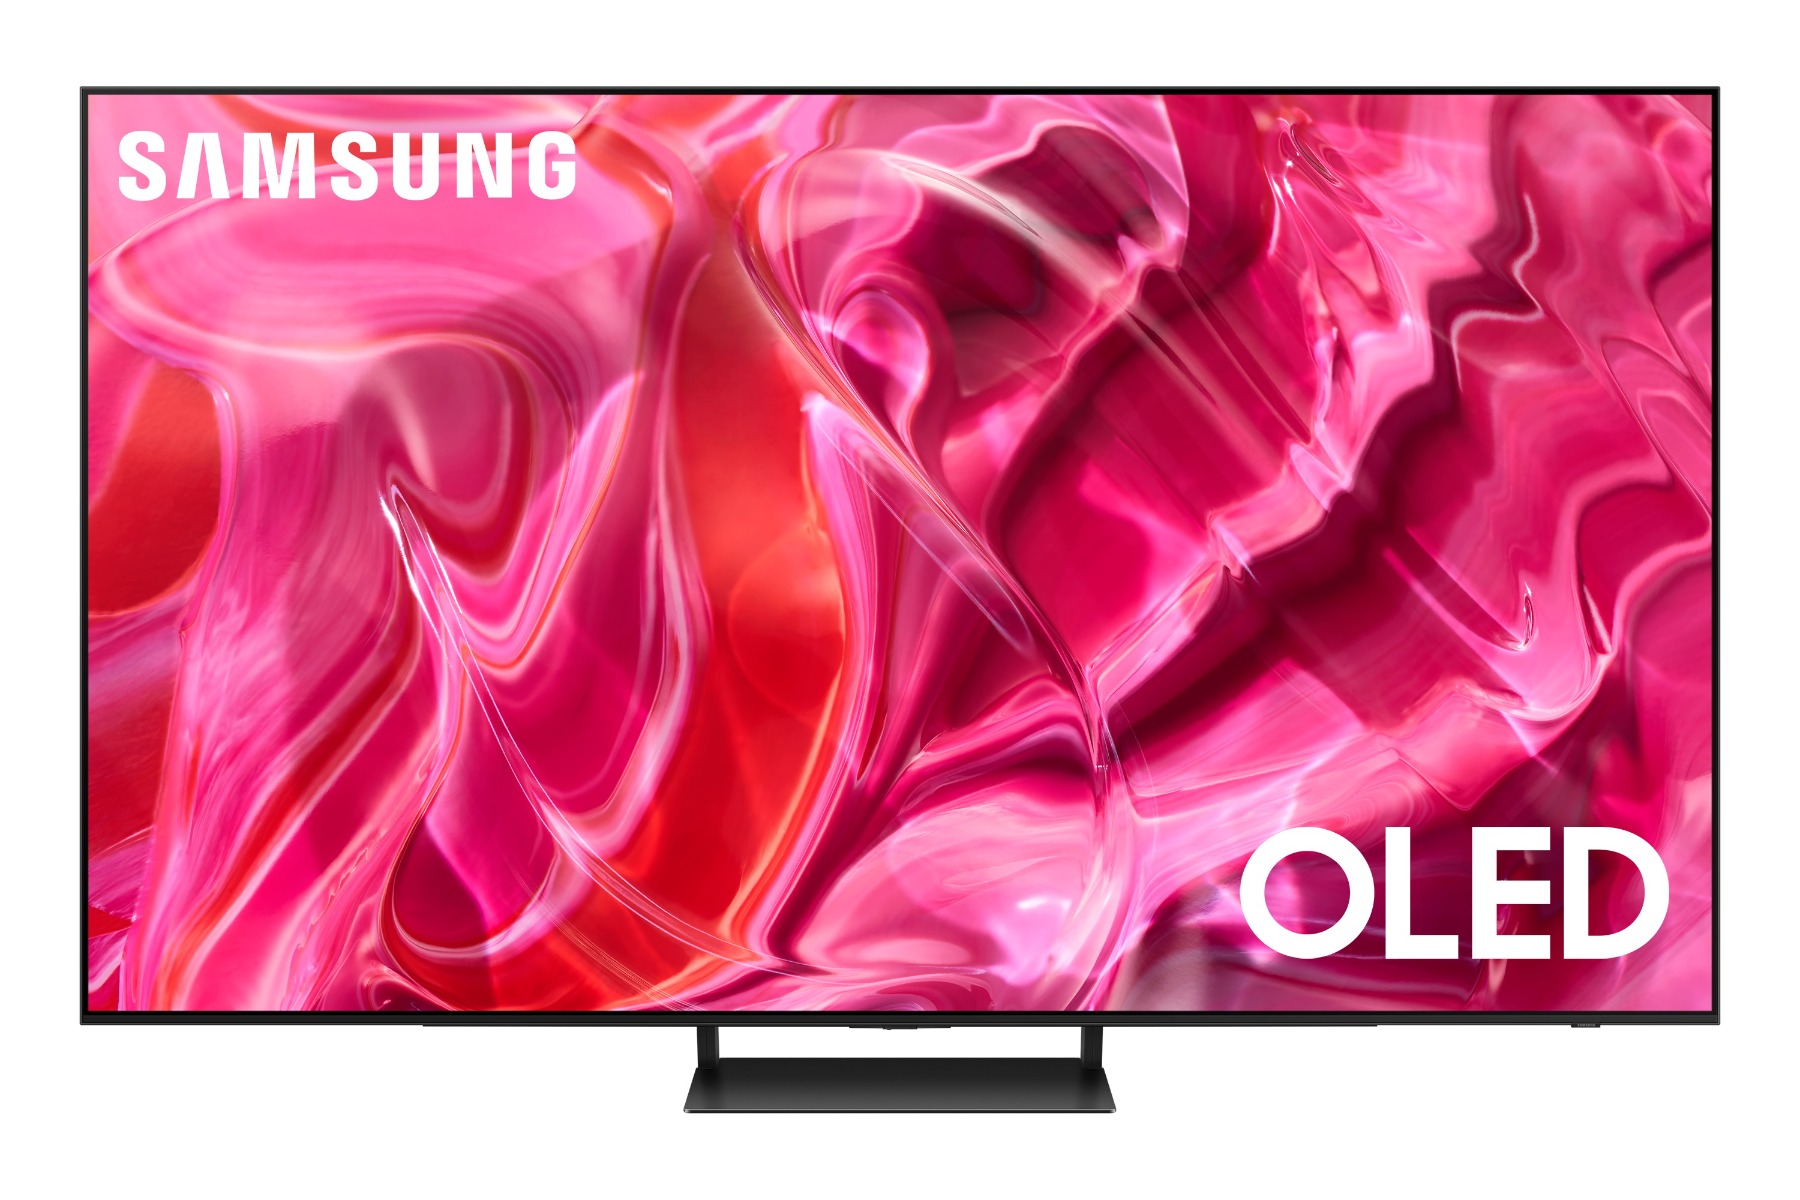 Samsung 55 Inch 4K UHD OLED Smart TV with Built-In Receiver- 55S90CA